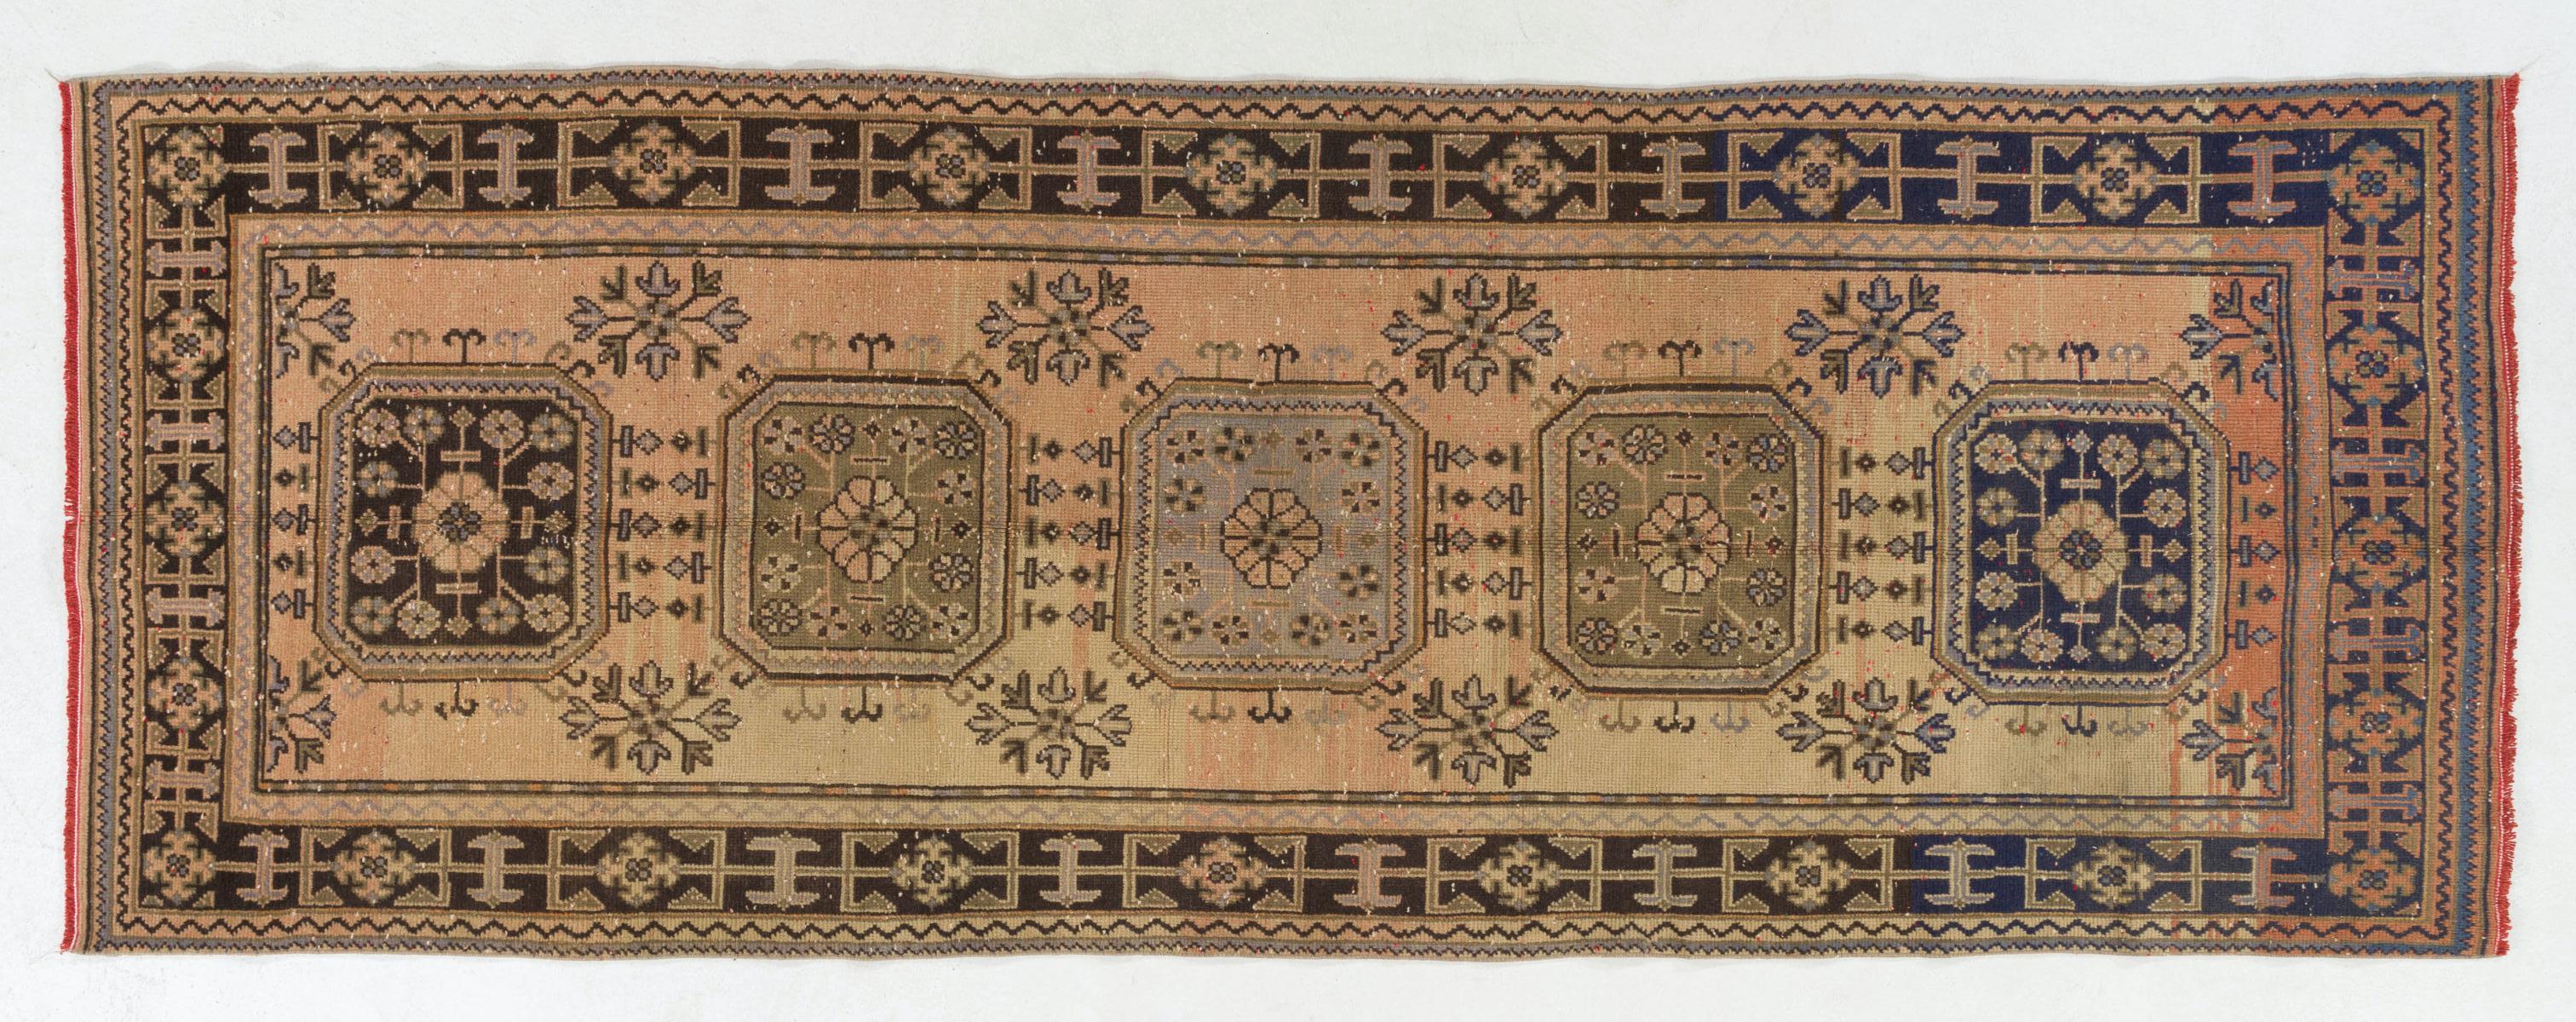 Hand-Knotted 4.2x11.6 Ft Handmade Vintage Turkish Rug. Wool and Cotton Hallway Runner For Sale